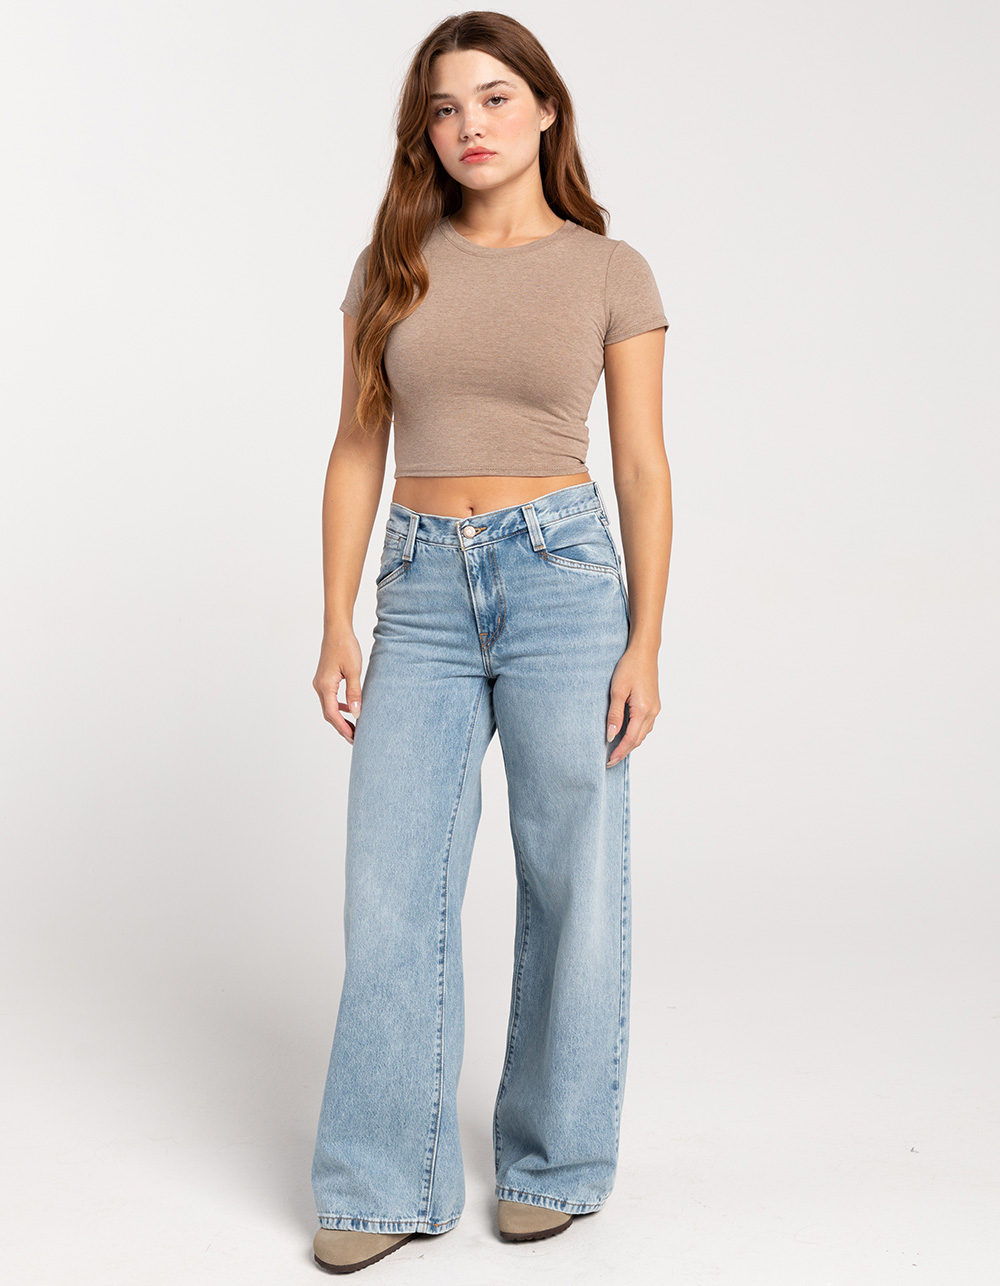 BOZZOLO Womens Cropped Tee - MOCHA | Tillys